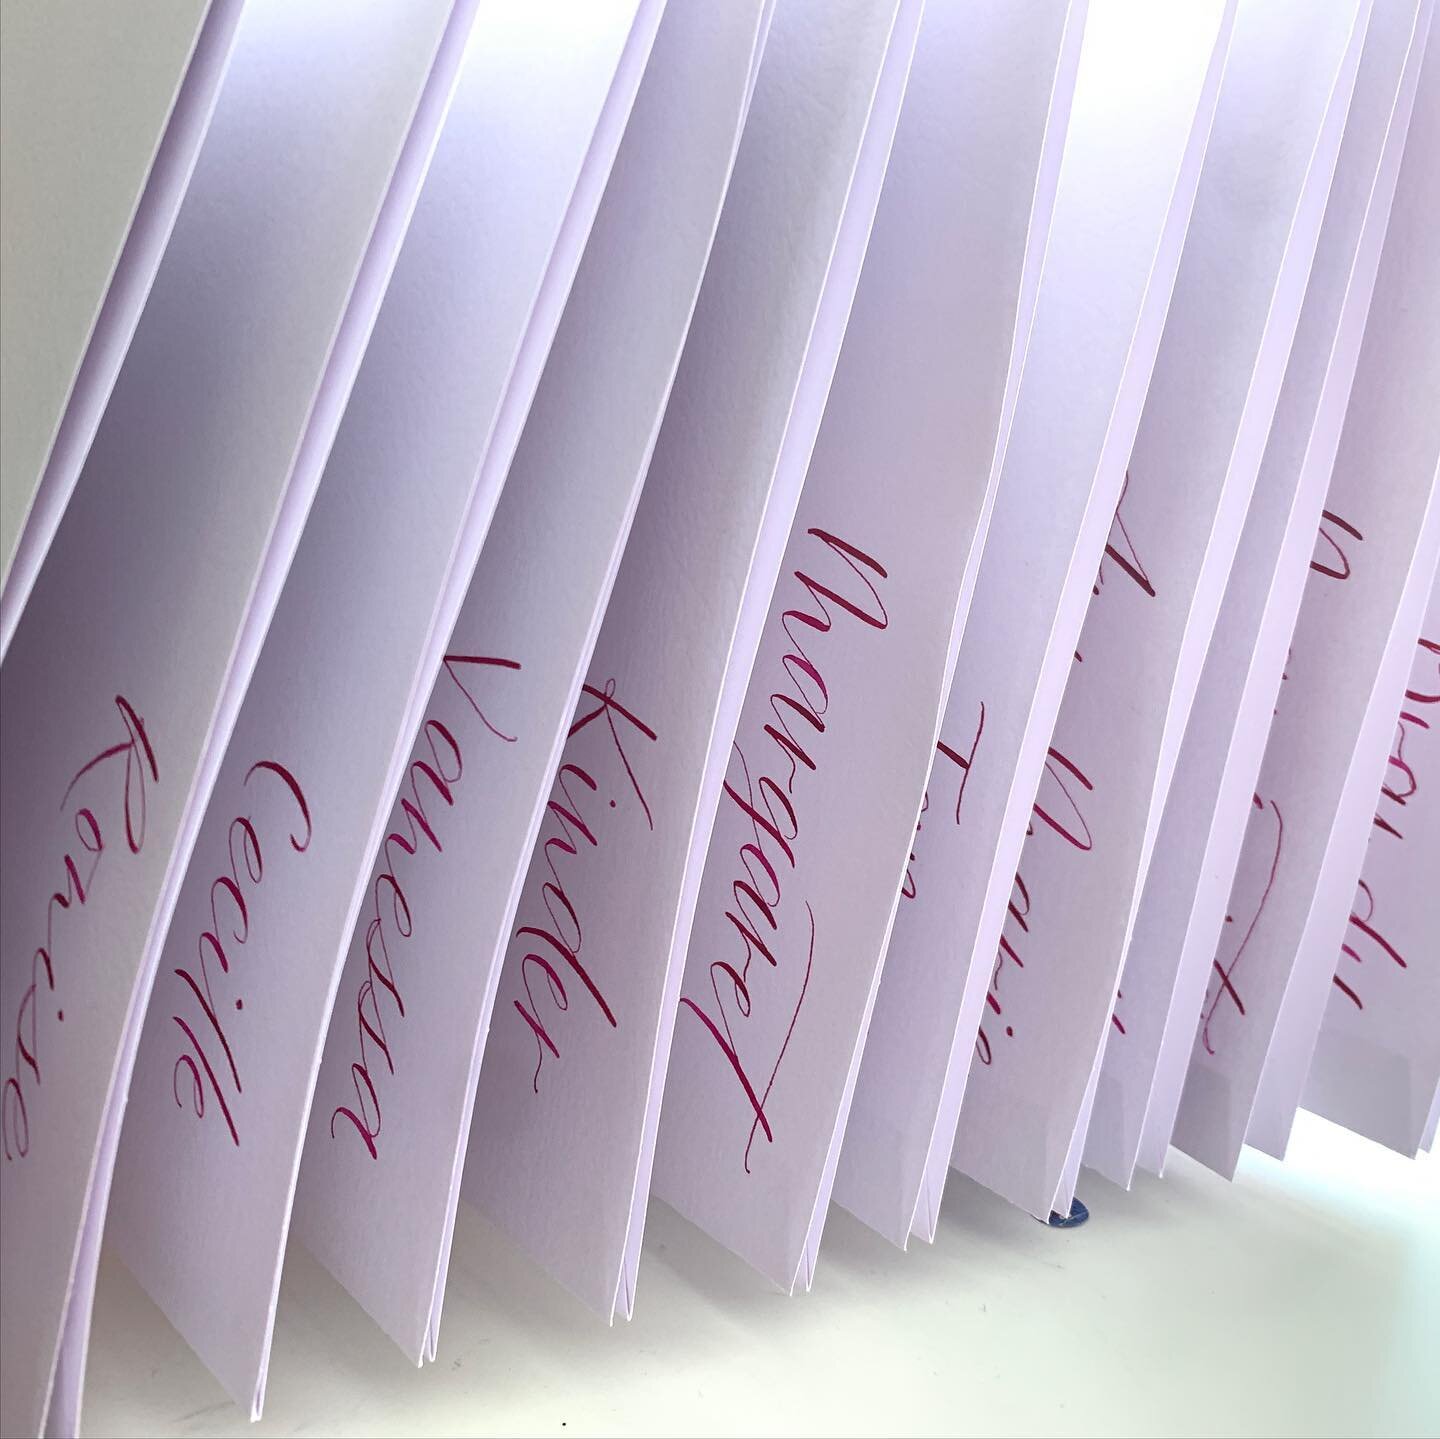 Custom calligraphy isn&rsquo;t just for invitations or envelopes! These personalized folders are for a baby shower, aren&rsquo;t they fun?! 
.
.
#customcalligraphy #placecards #babyshowerfun #makeitpersonal #marylandcalligrapher #rockvillecalligraphe